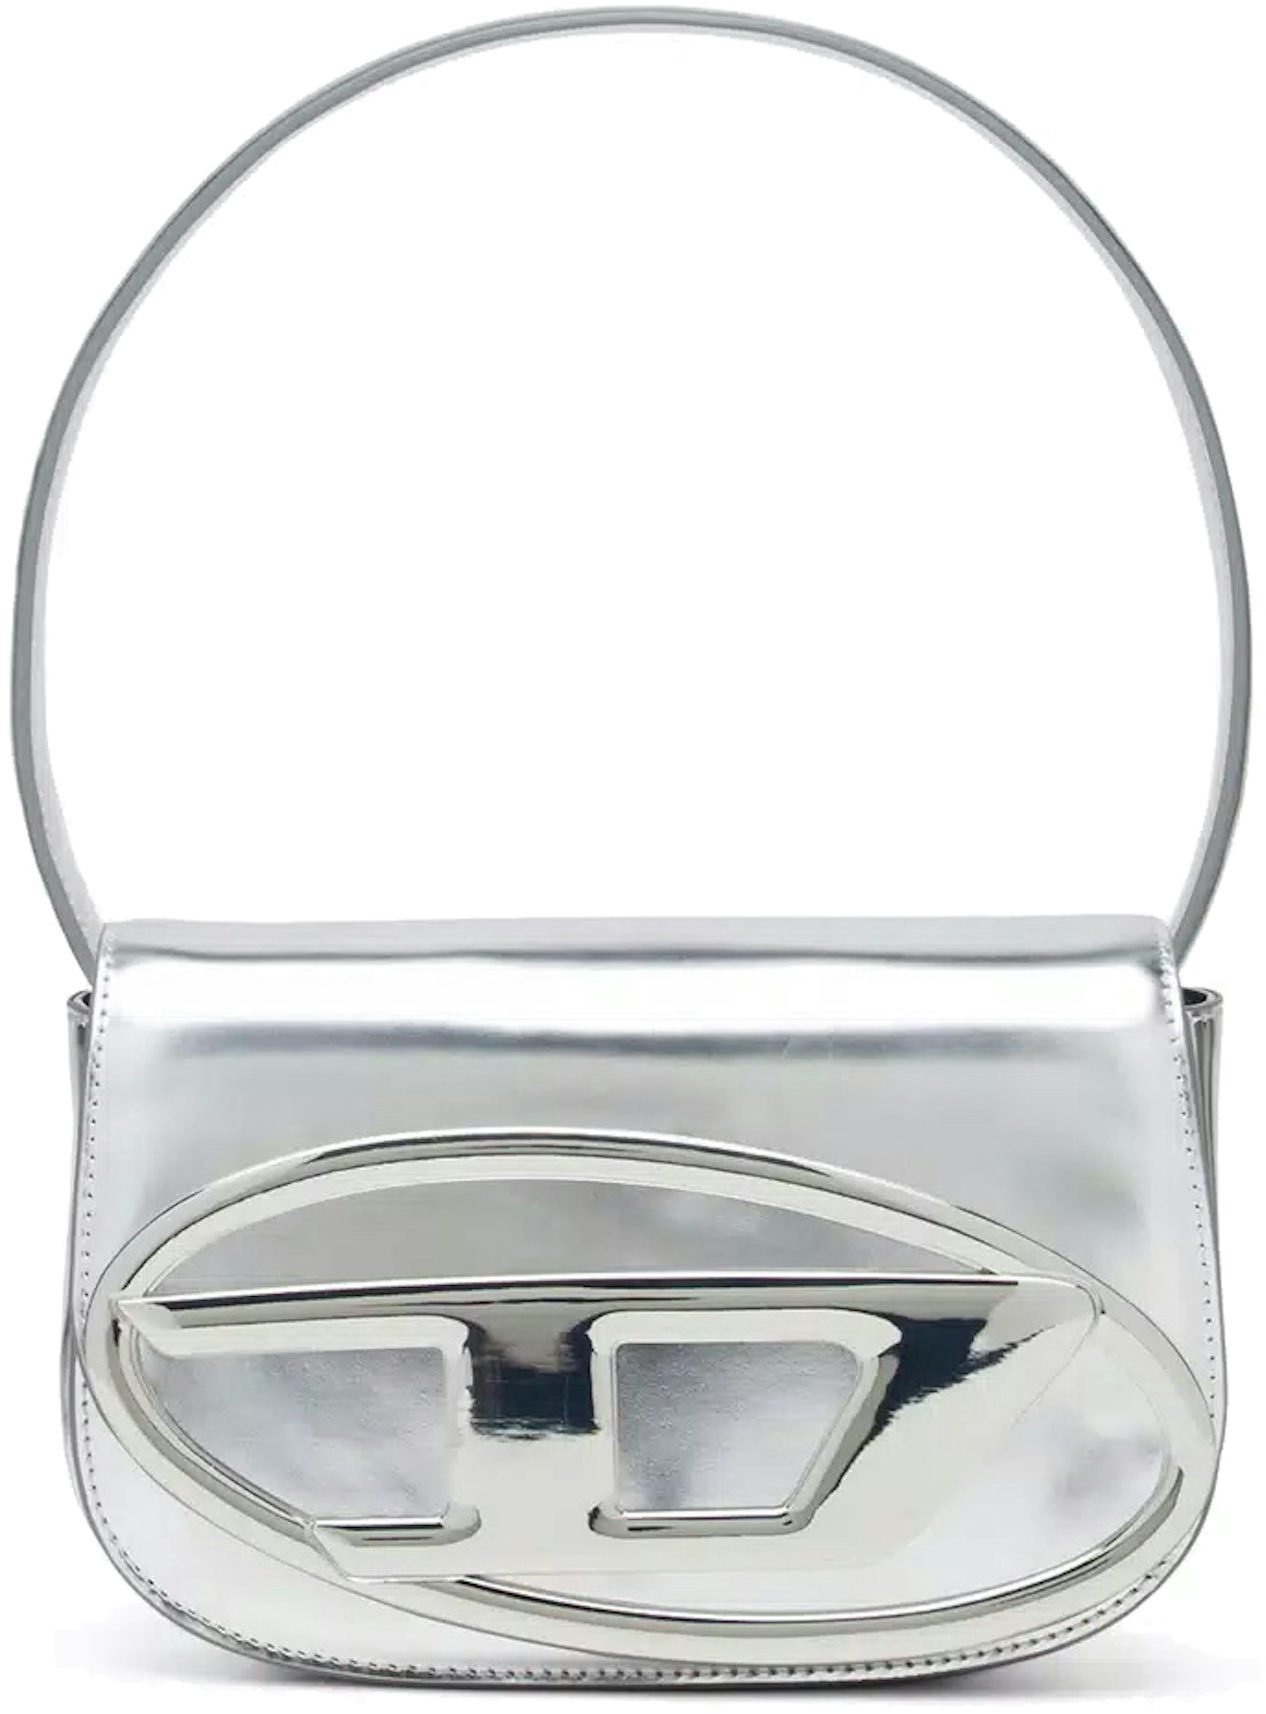 Diesel 1DR Shoulder Bag Mirrored Leather Silver in Mirrored